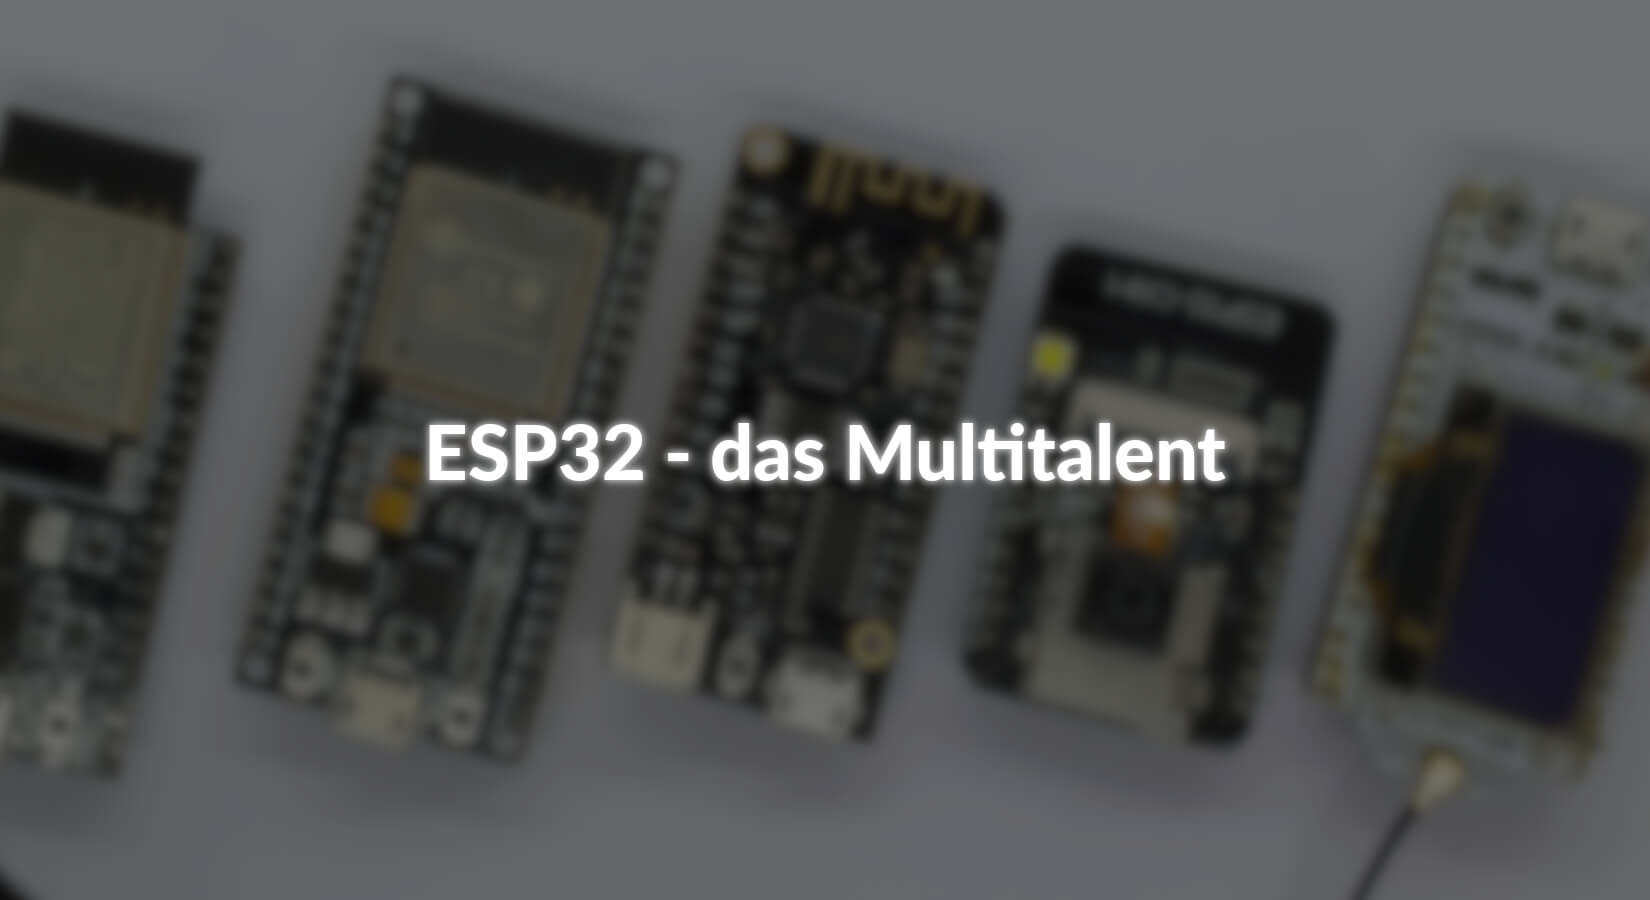 ESP 32 and multiple CAN BUS